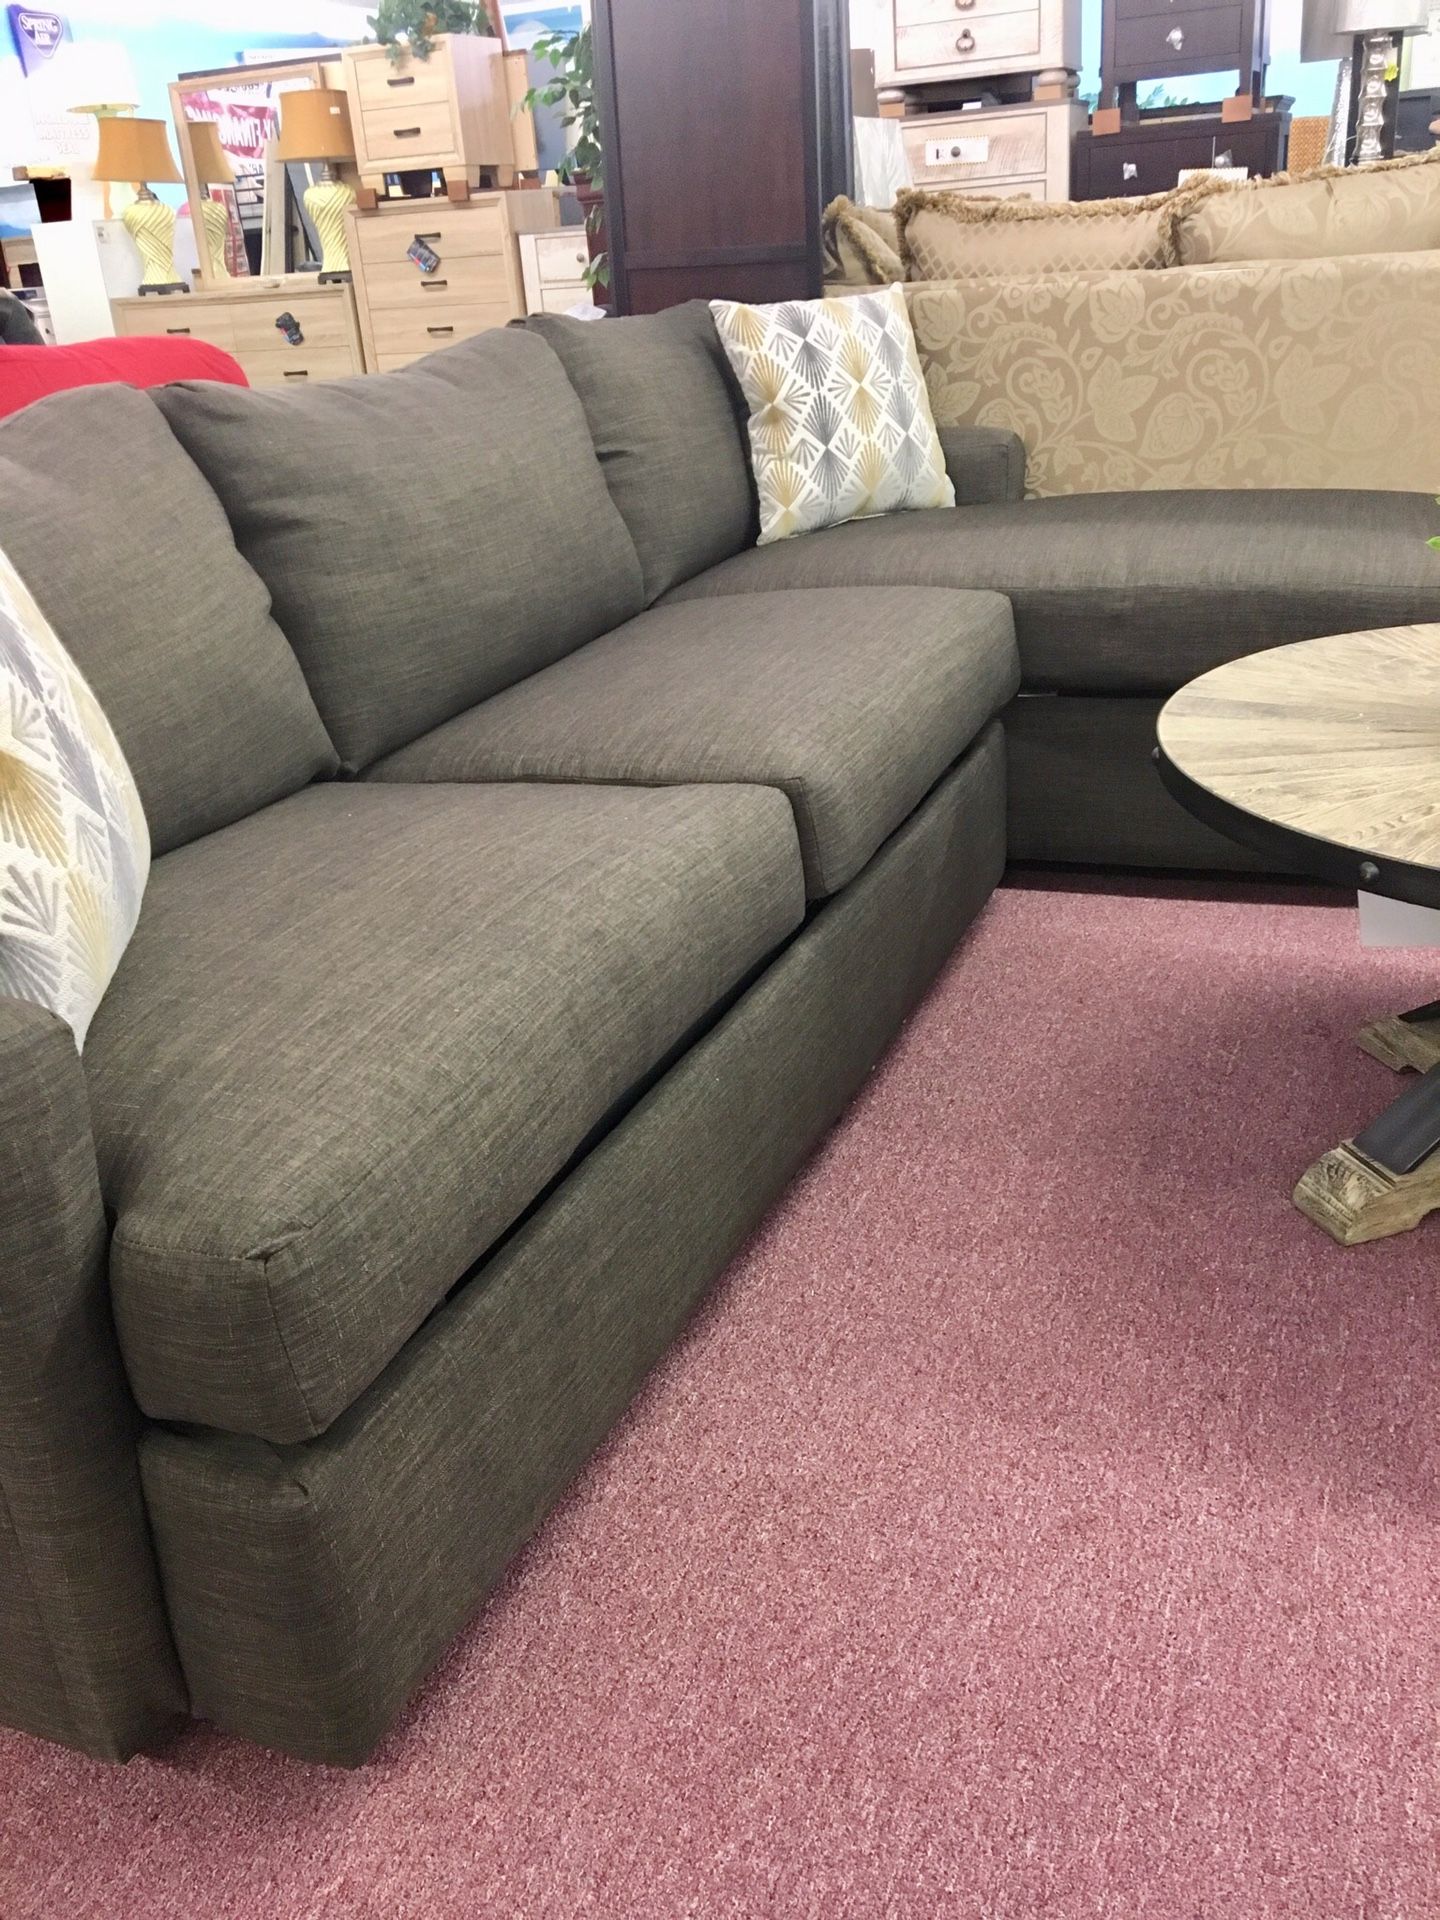 🇺🇸HUGE Furniture Sale!🇺🇸 Brand New Brown Sleeper Sofa Sectional! $50 Down Takes It Home Today!